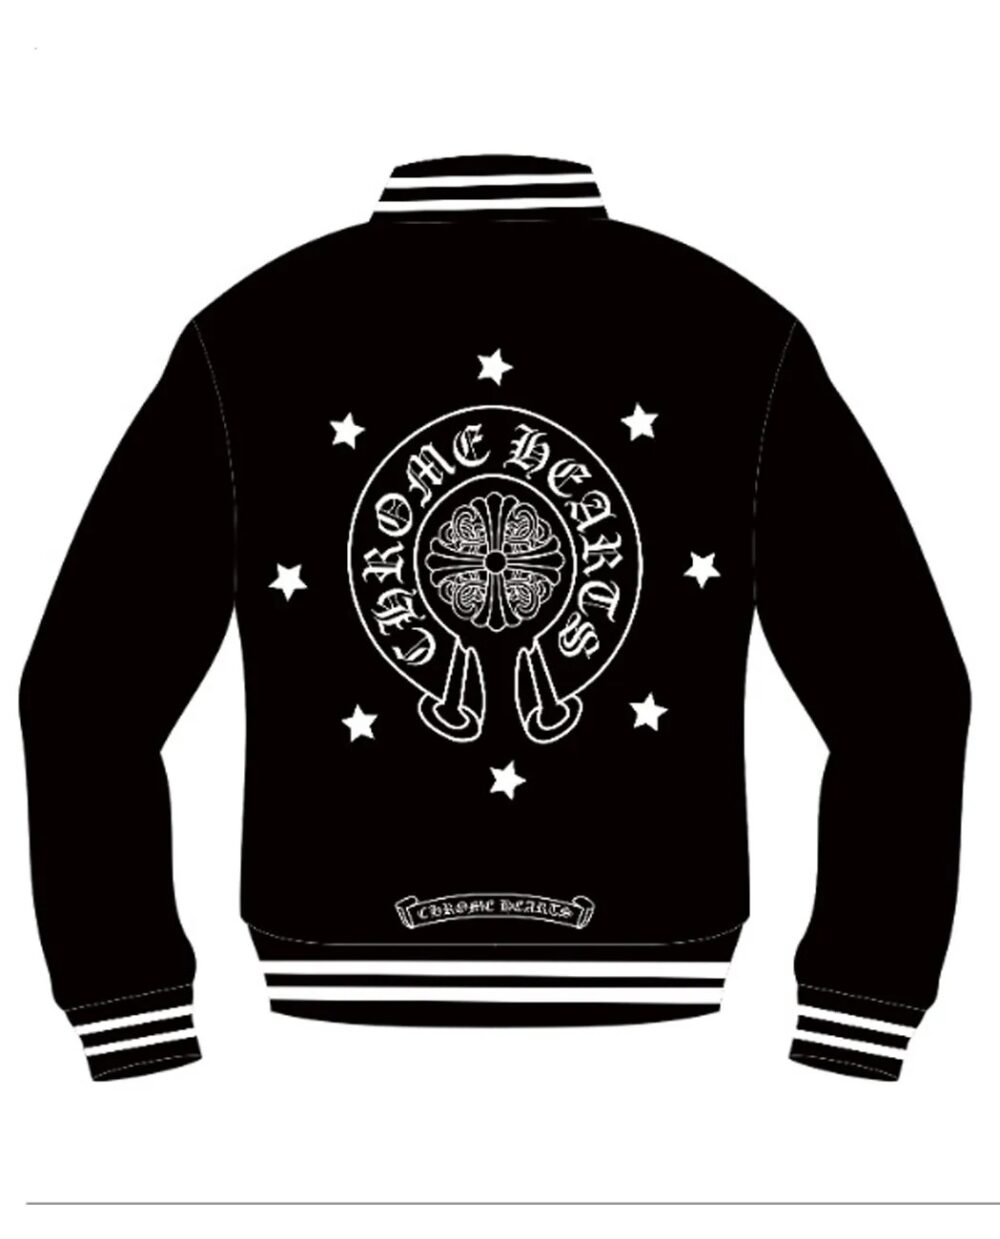 "Introducing the Chrome Hearts Malibu Exclusive Stars Jacket – a symbol of luxury and style."